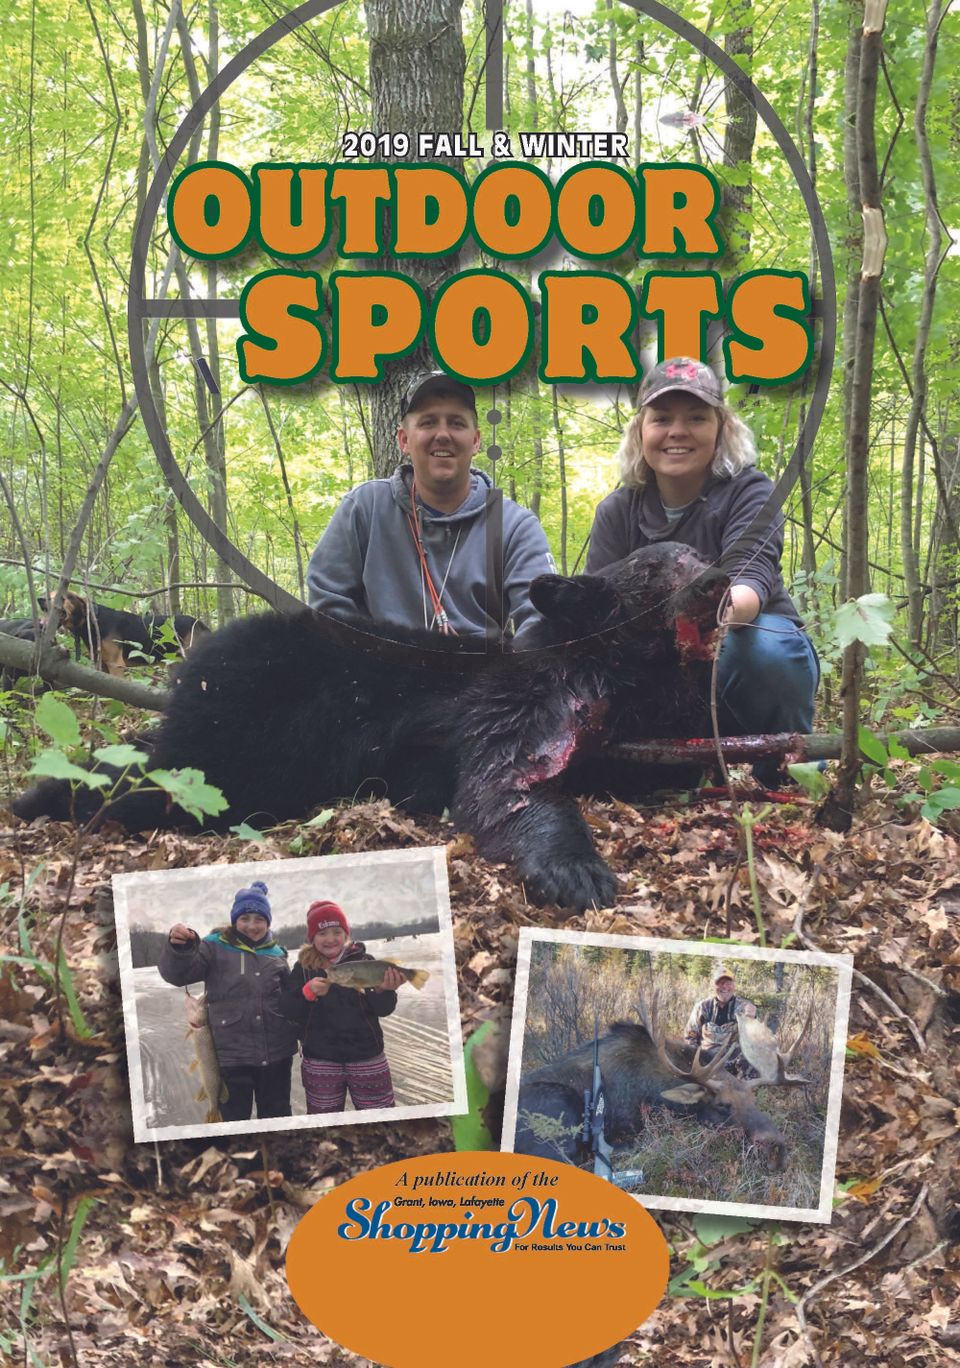 Outdoorsports2019